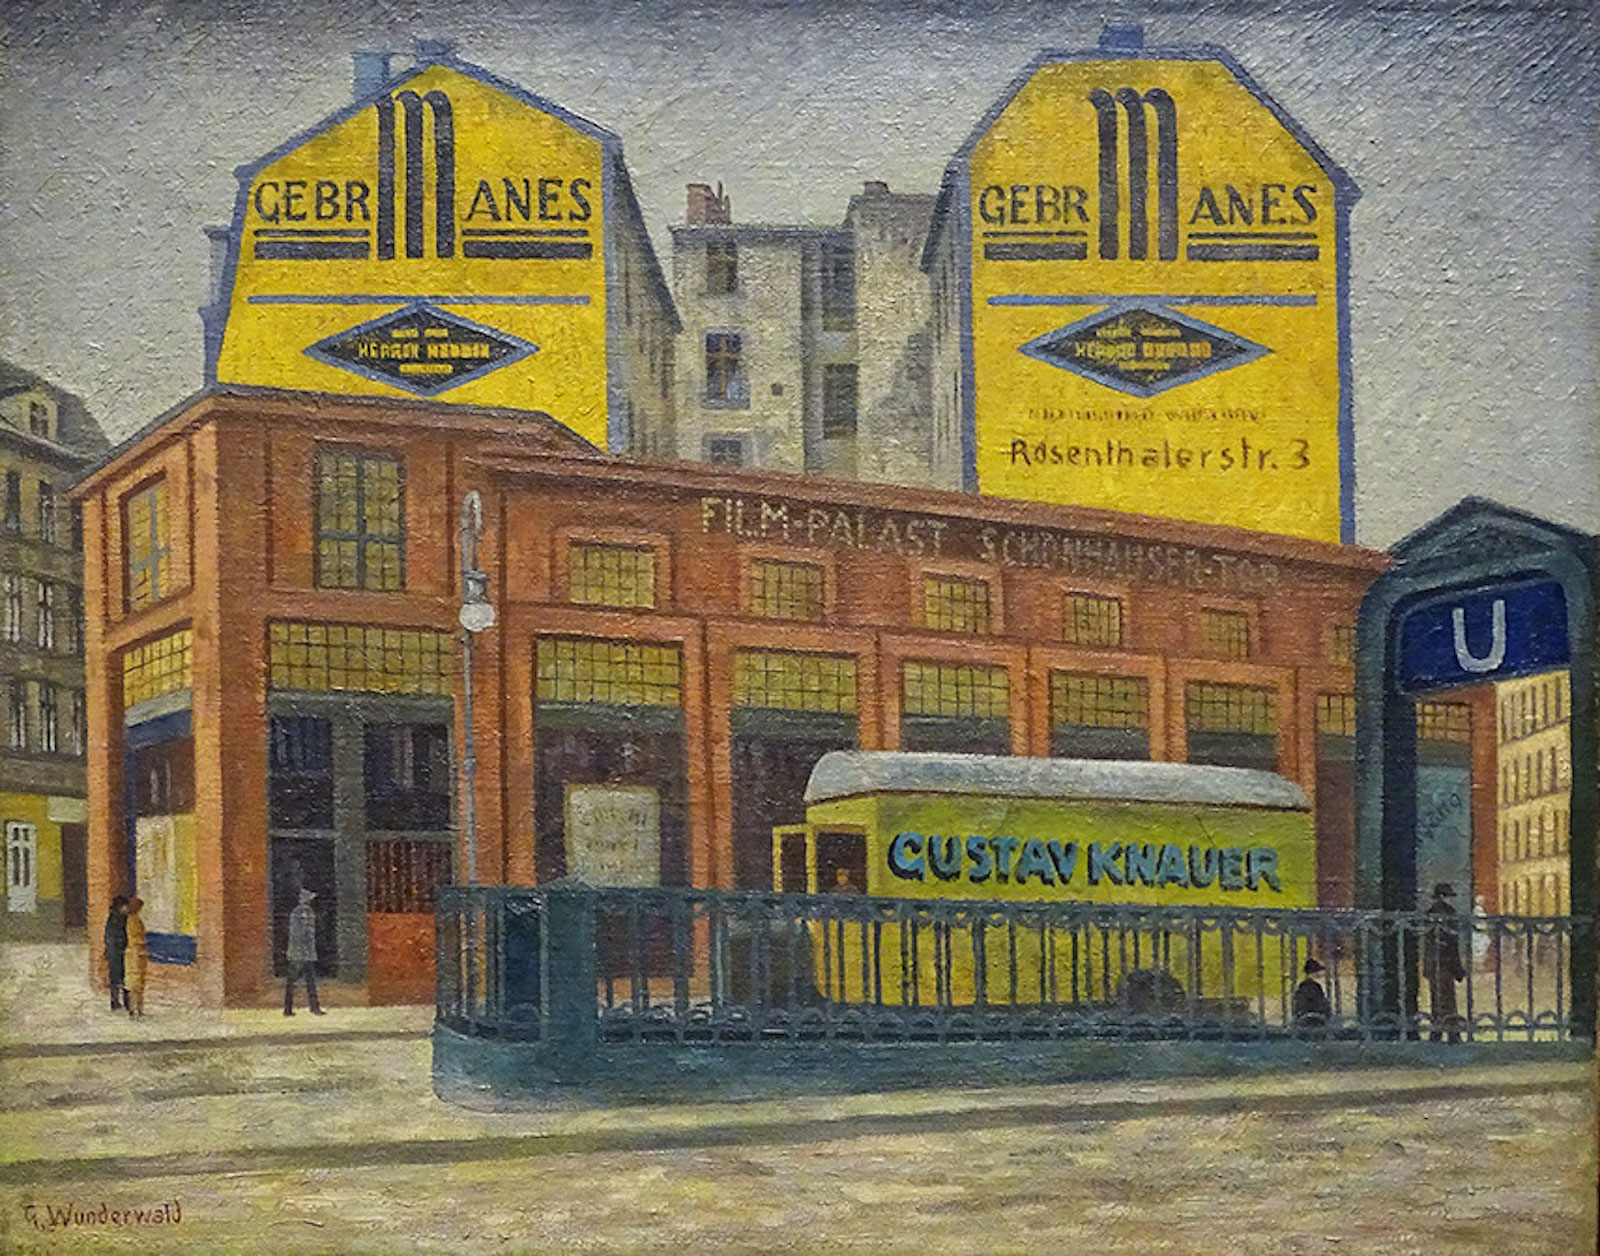 A painting of a large brick movie theater next to a metro station